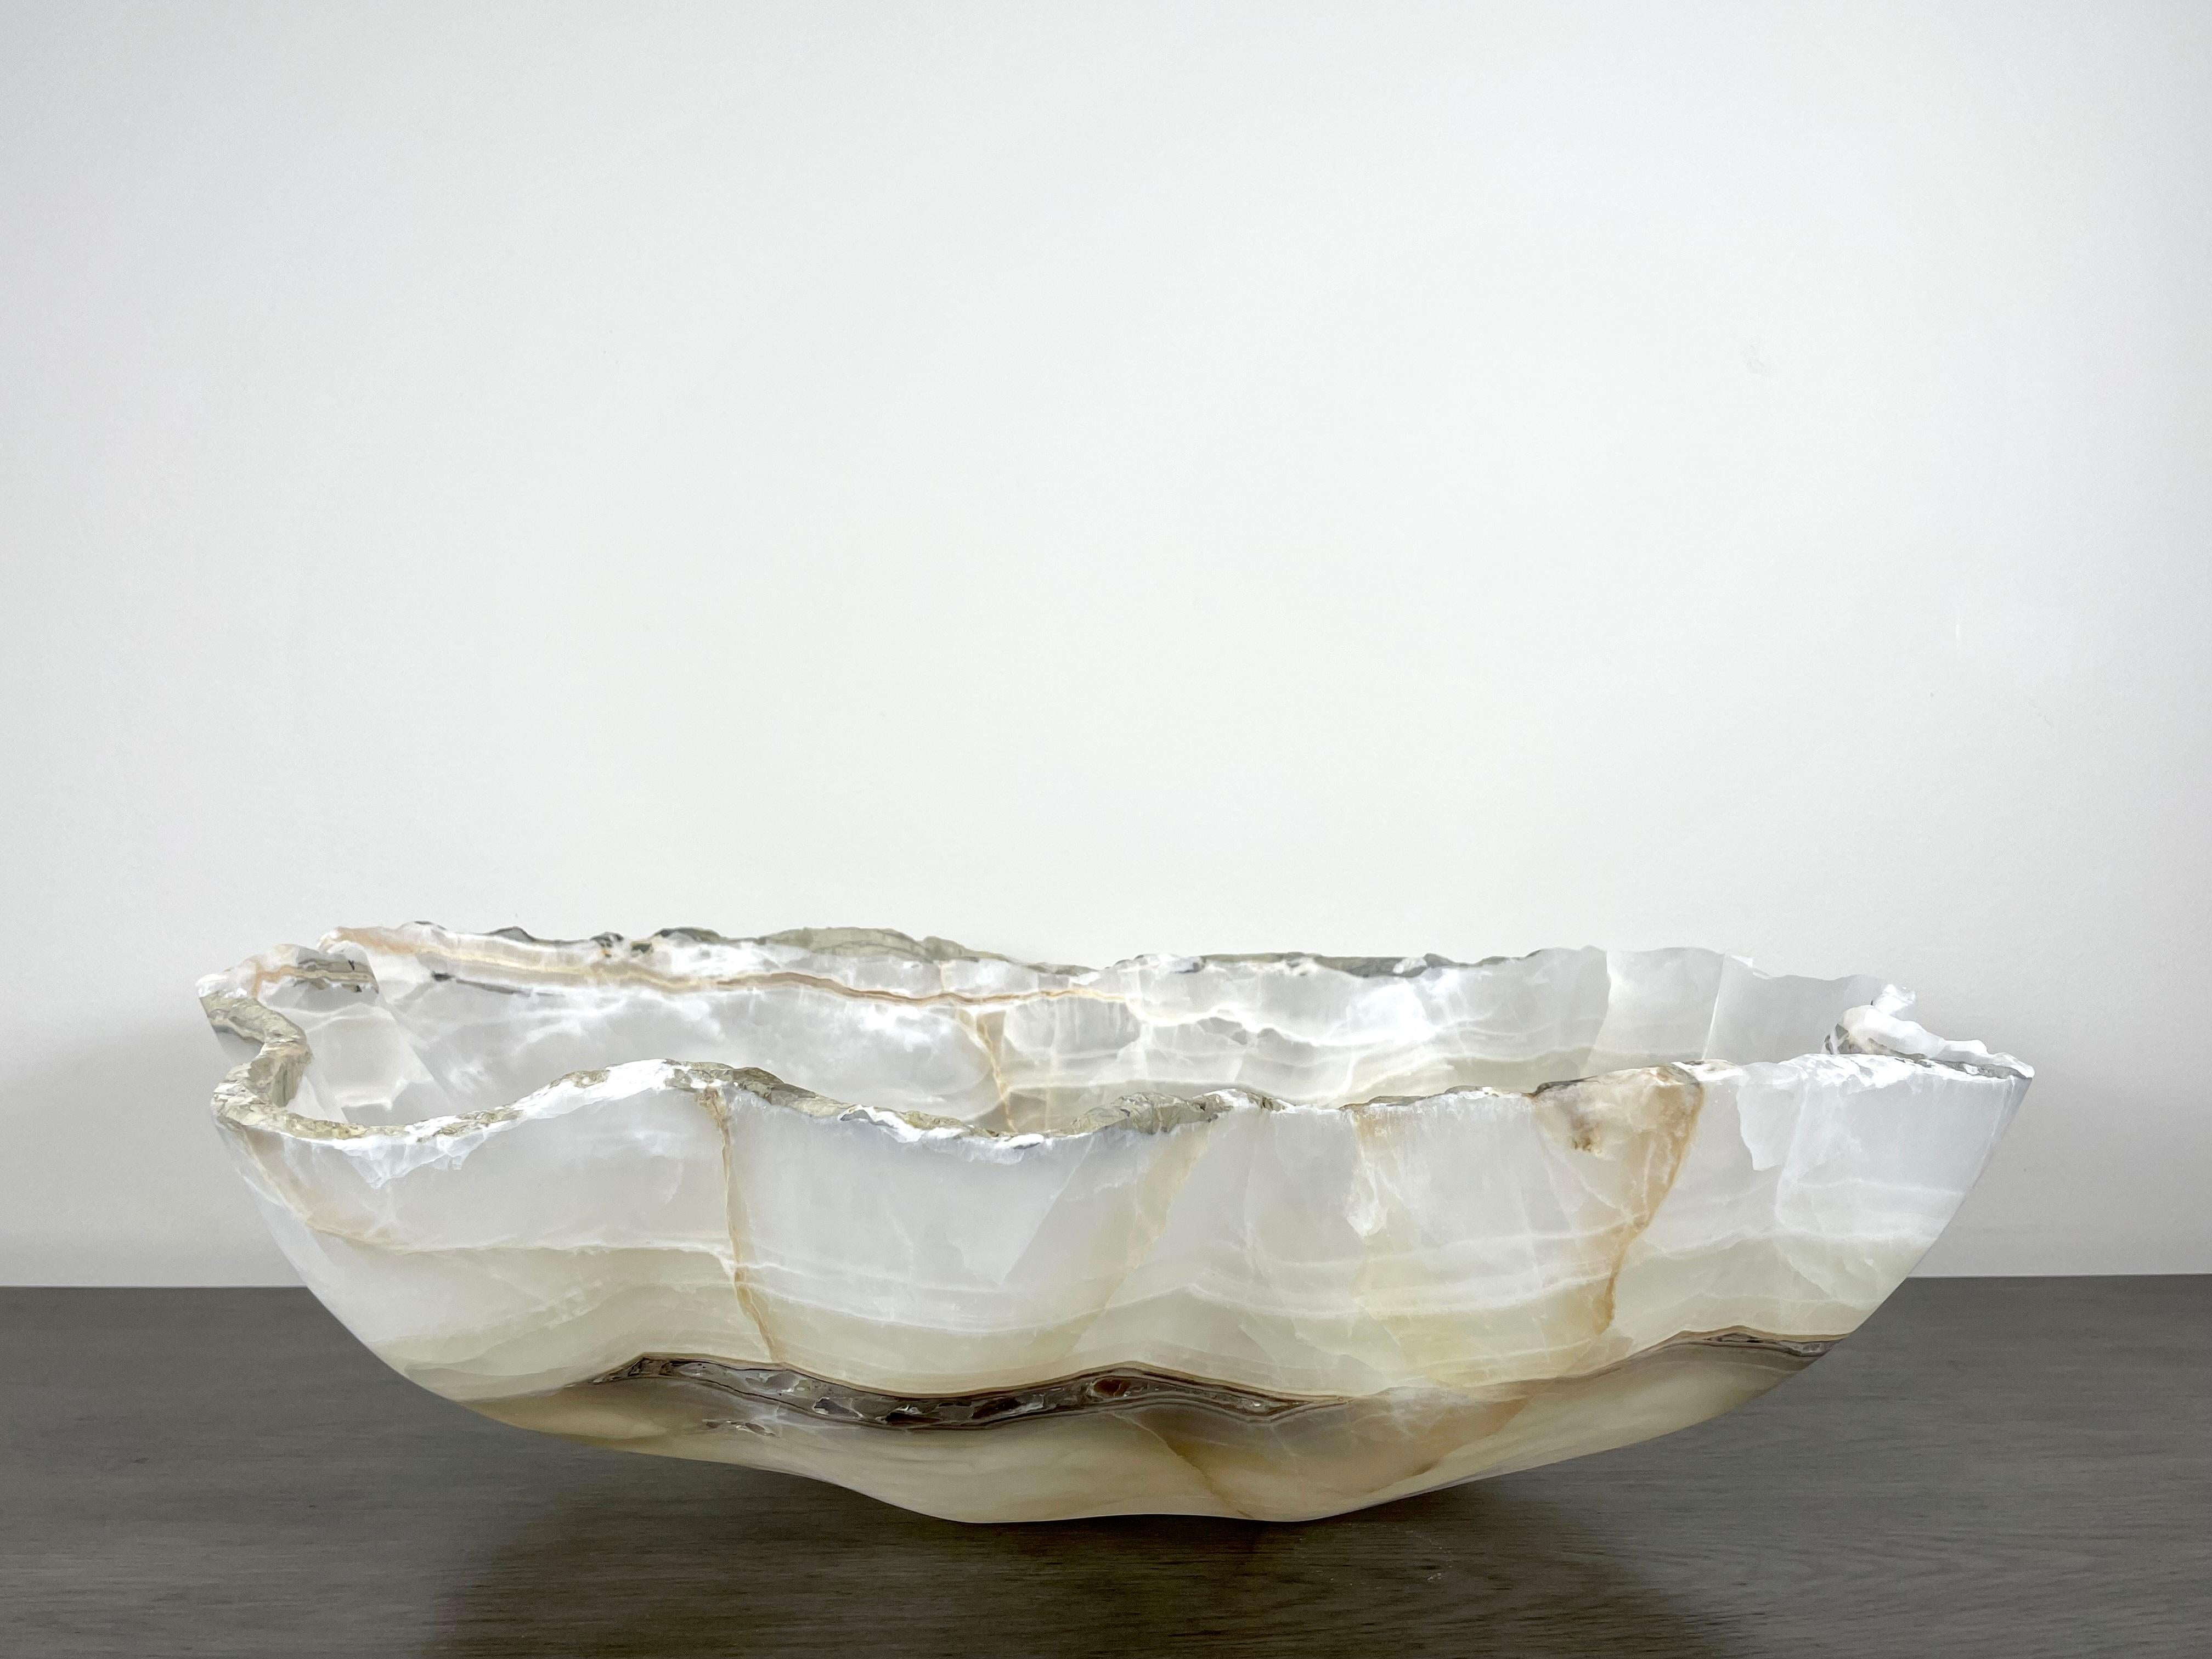 A stunning extra large white onyx bowl with accents of pale grey, greige and black/brown. This one of a kind decorative bowl is meticulously hand-carved from a single piece of onyx by skilled artists to reveal its' inherent characteristics such as